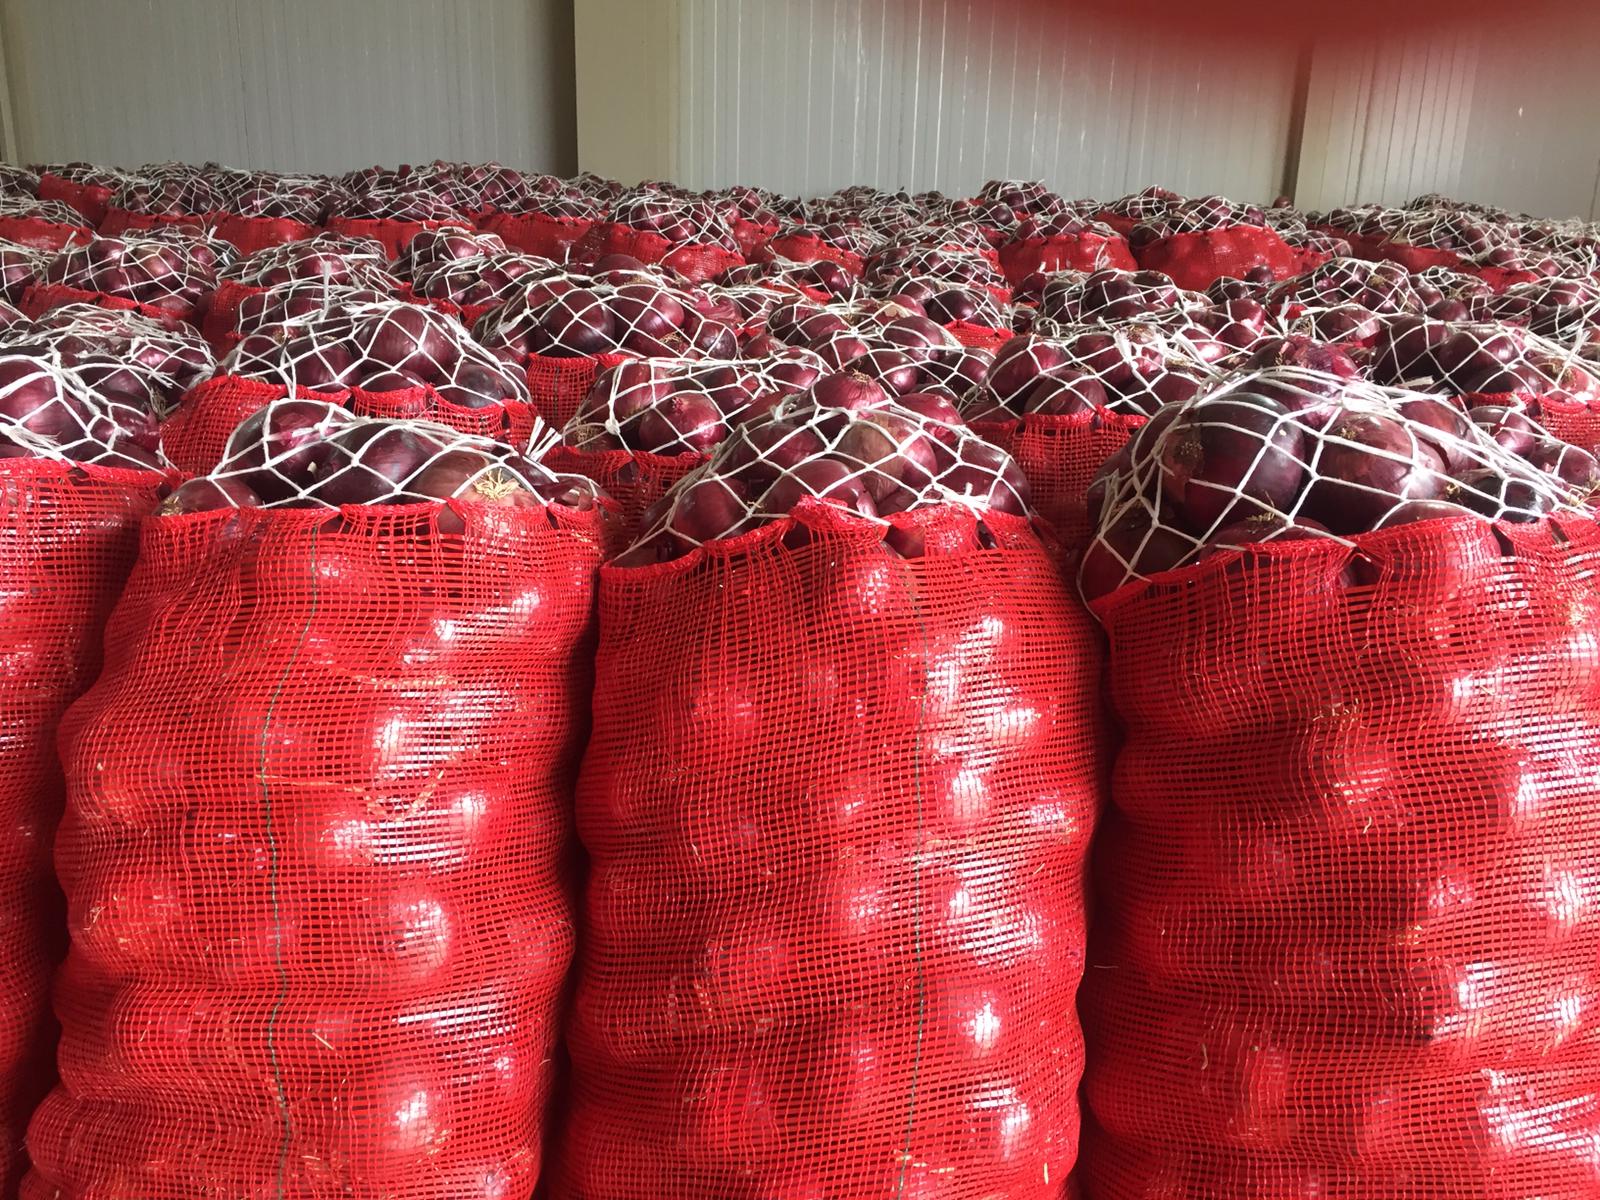 Product image - ImportTR company generally imports &exports fresh farm produce to more 15 countries. We are leading exporter of Turkish cultivated fruits and vegetables. We can provide you product as per your requirement. Offer for Red Onion packing : 20 kg mesh bag. If you are serious to buy from us, we'll be happy to supply your needs. Kindly contact : Whatsapp- +90 533 669 13 89 Email: sumar@importtr.com